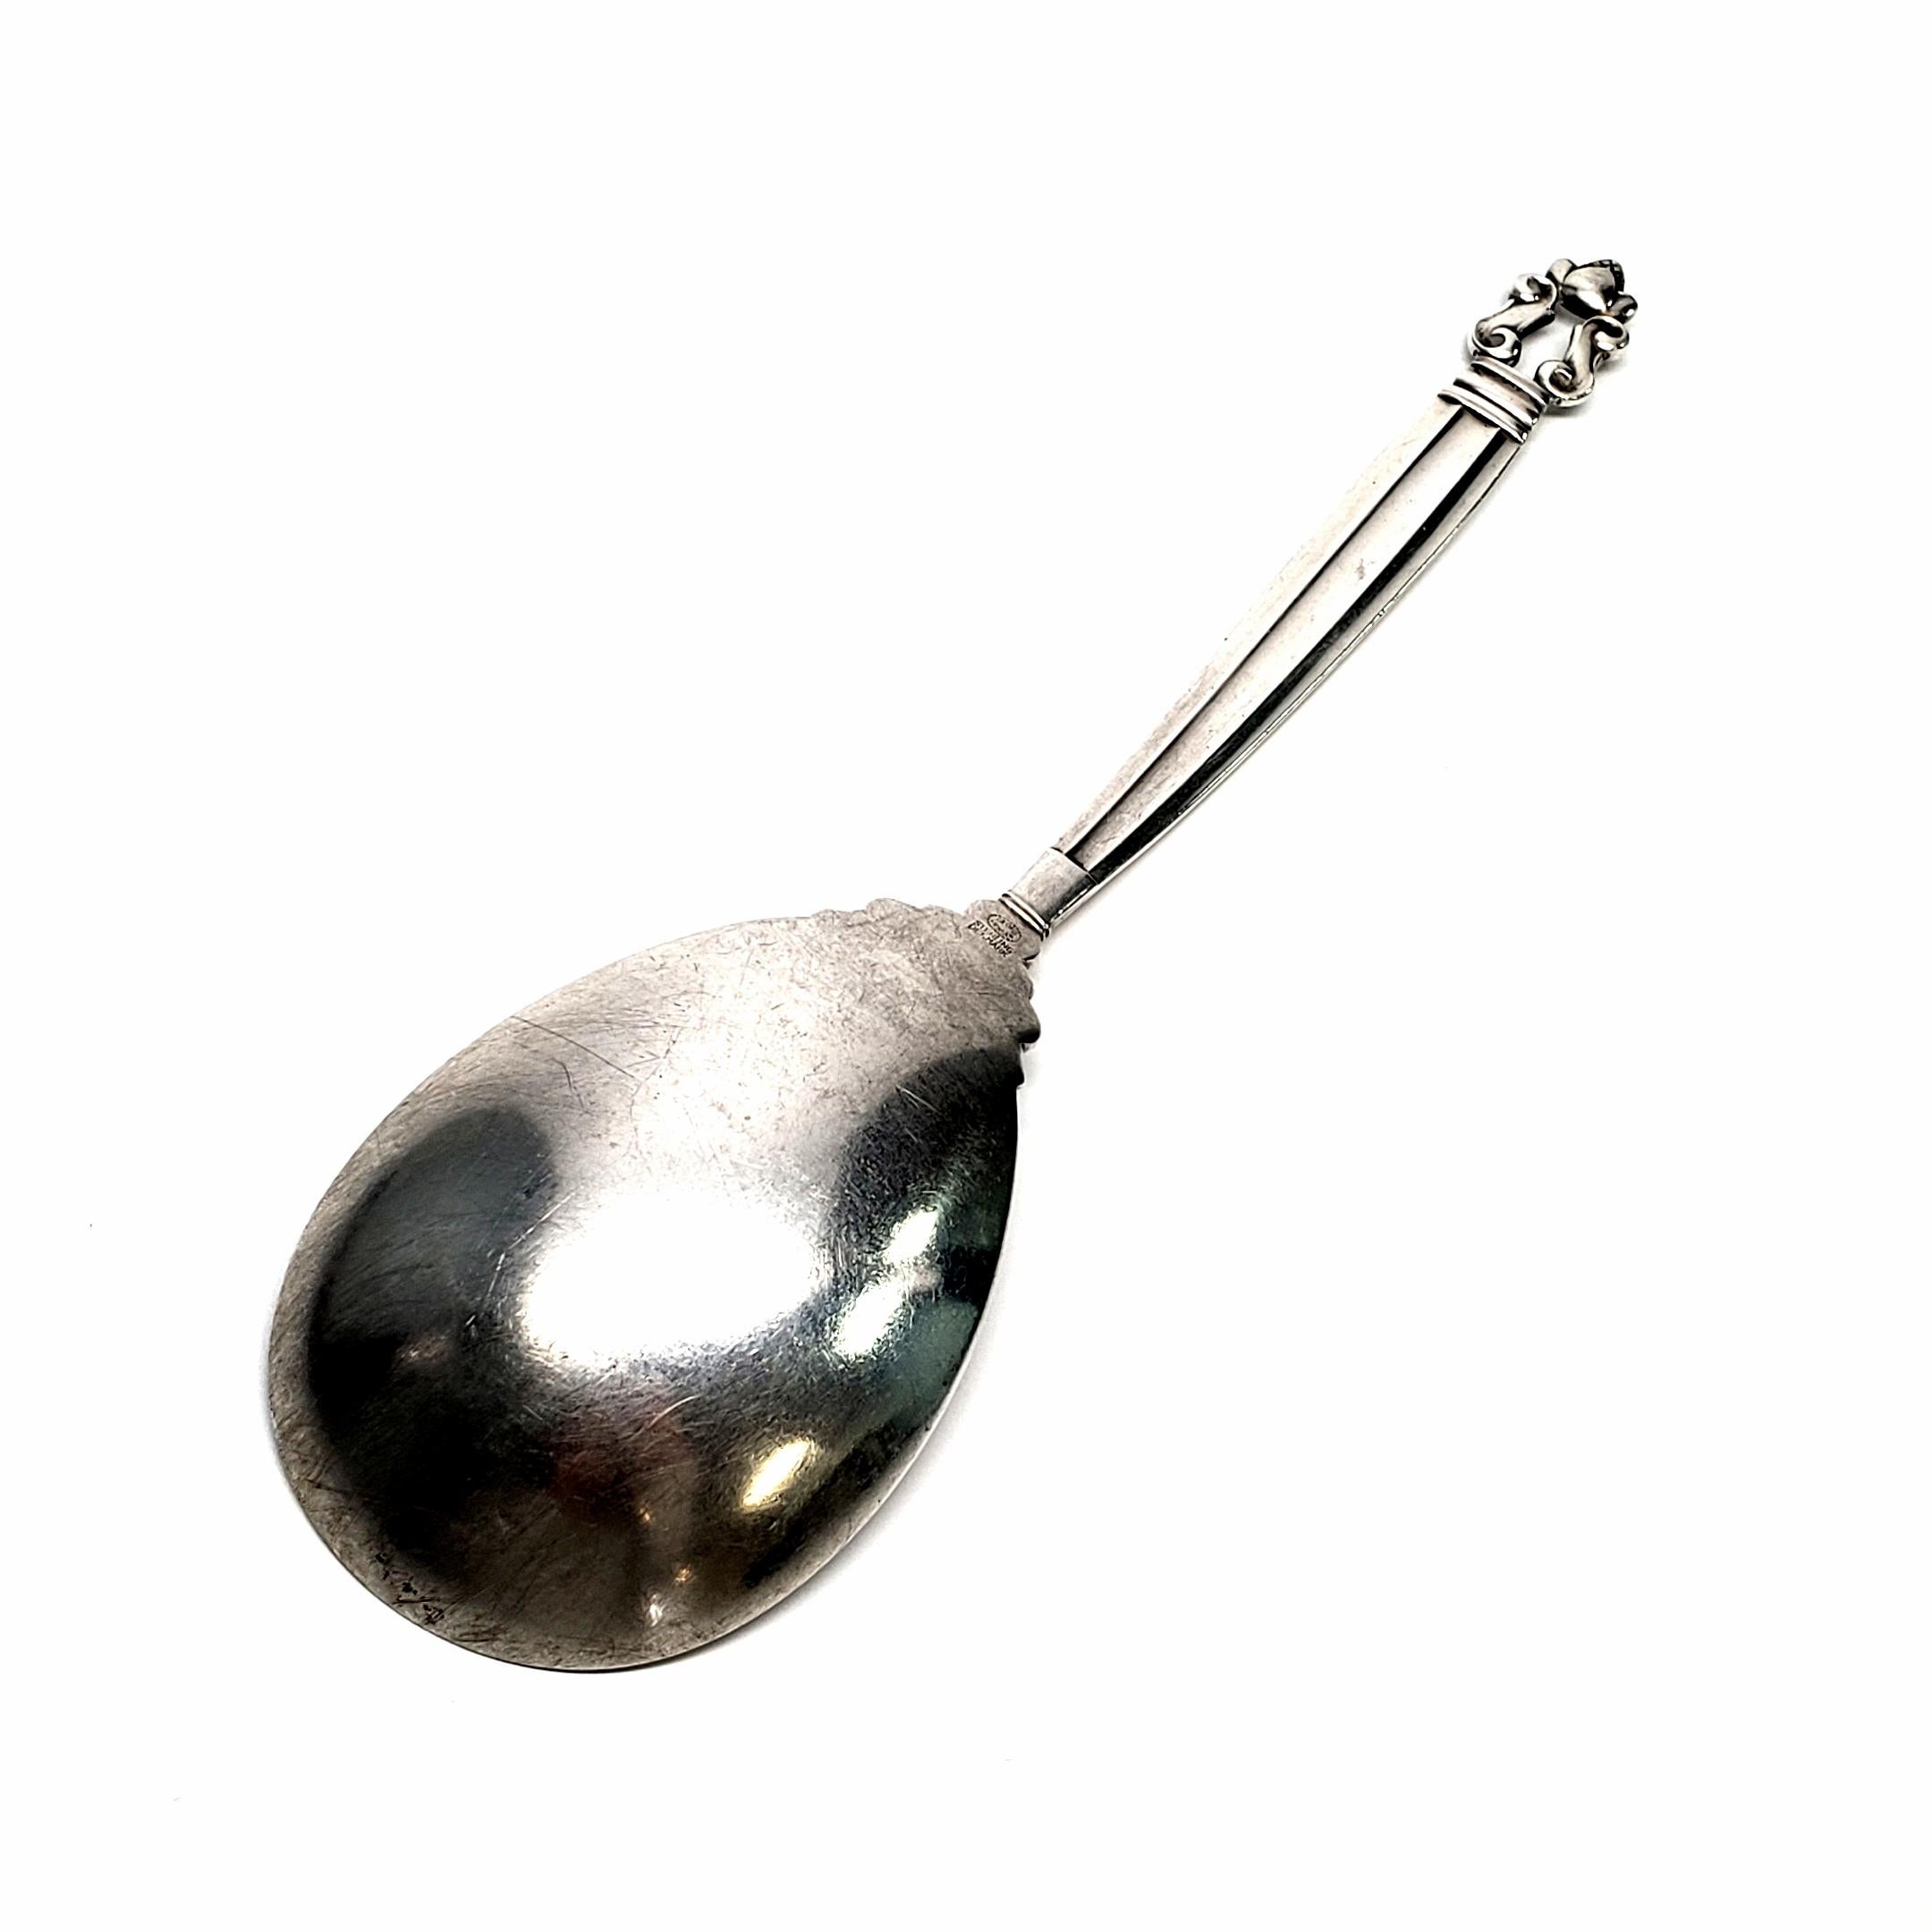 Vintage sterling silver medium serving spoon from Georg Jensen in the Acorn pattern.

The Acorn pattern was introduced in 1915 as a collaboration between Georg Jensen and designer Johan Ronde. The pattern combines Art Nouveau and Art Deco styles,